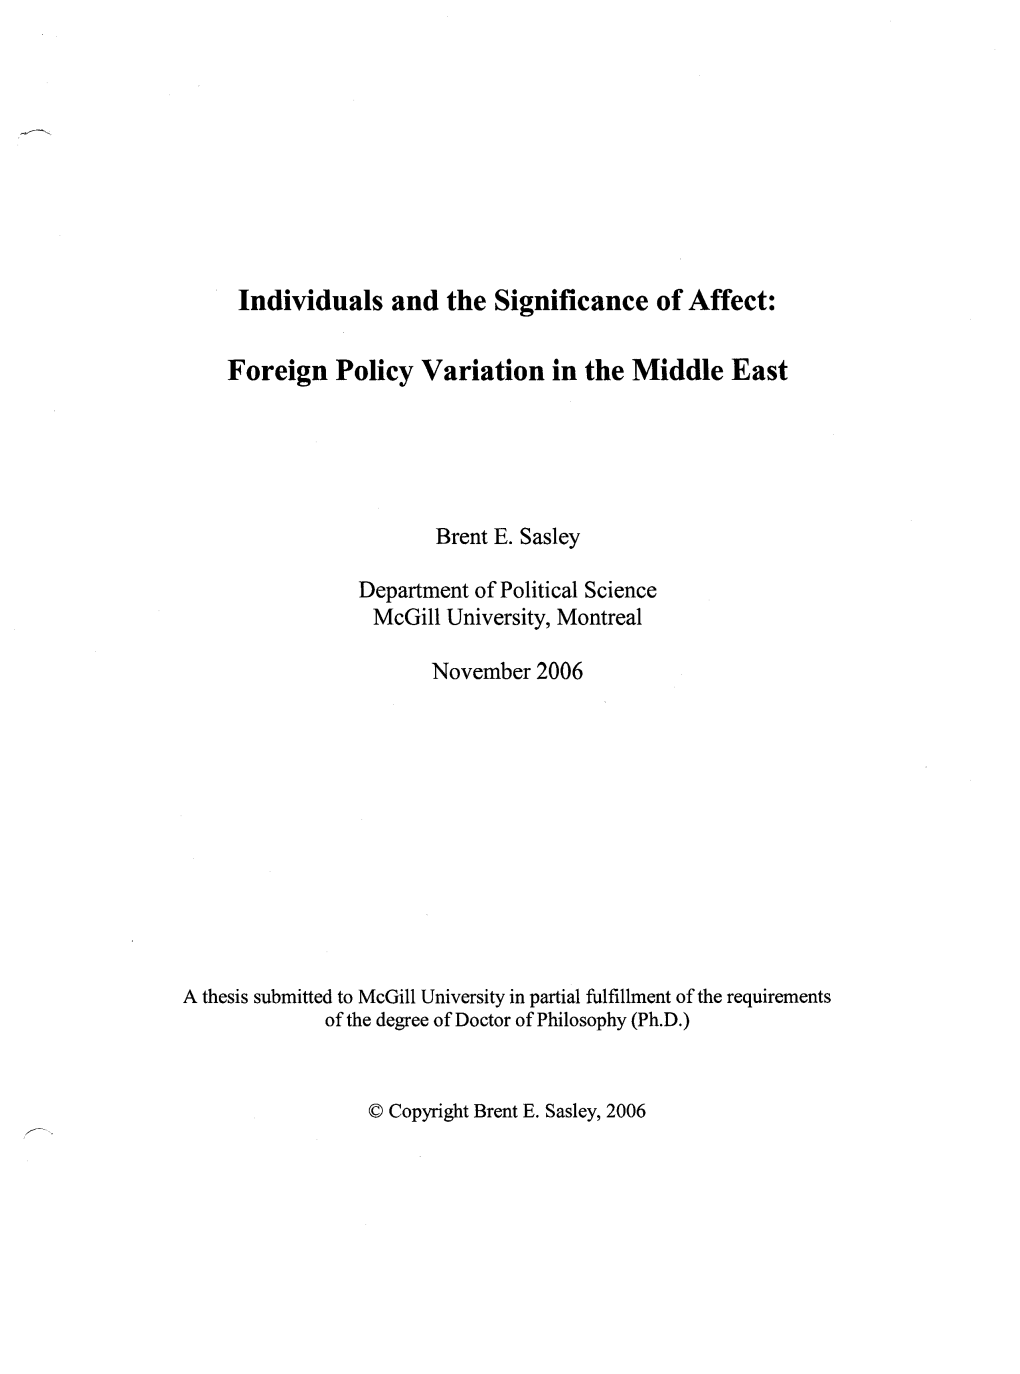 Individuals and the Significance of Affect: Foreign Policy Variation In